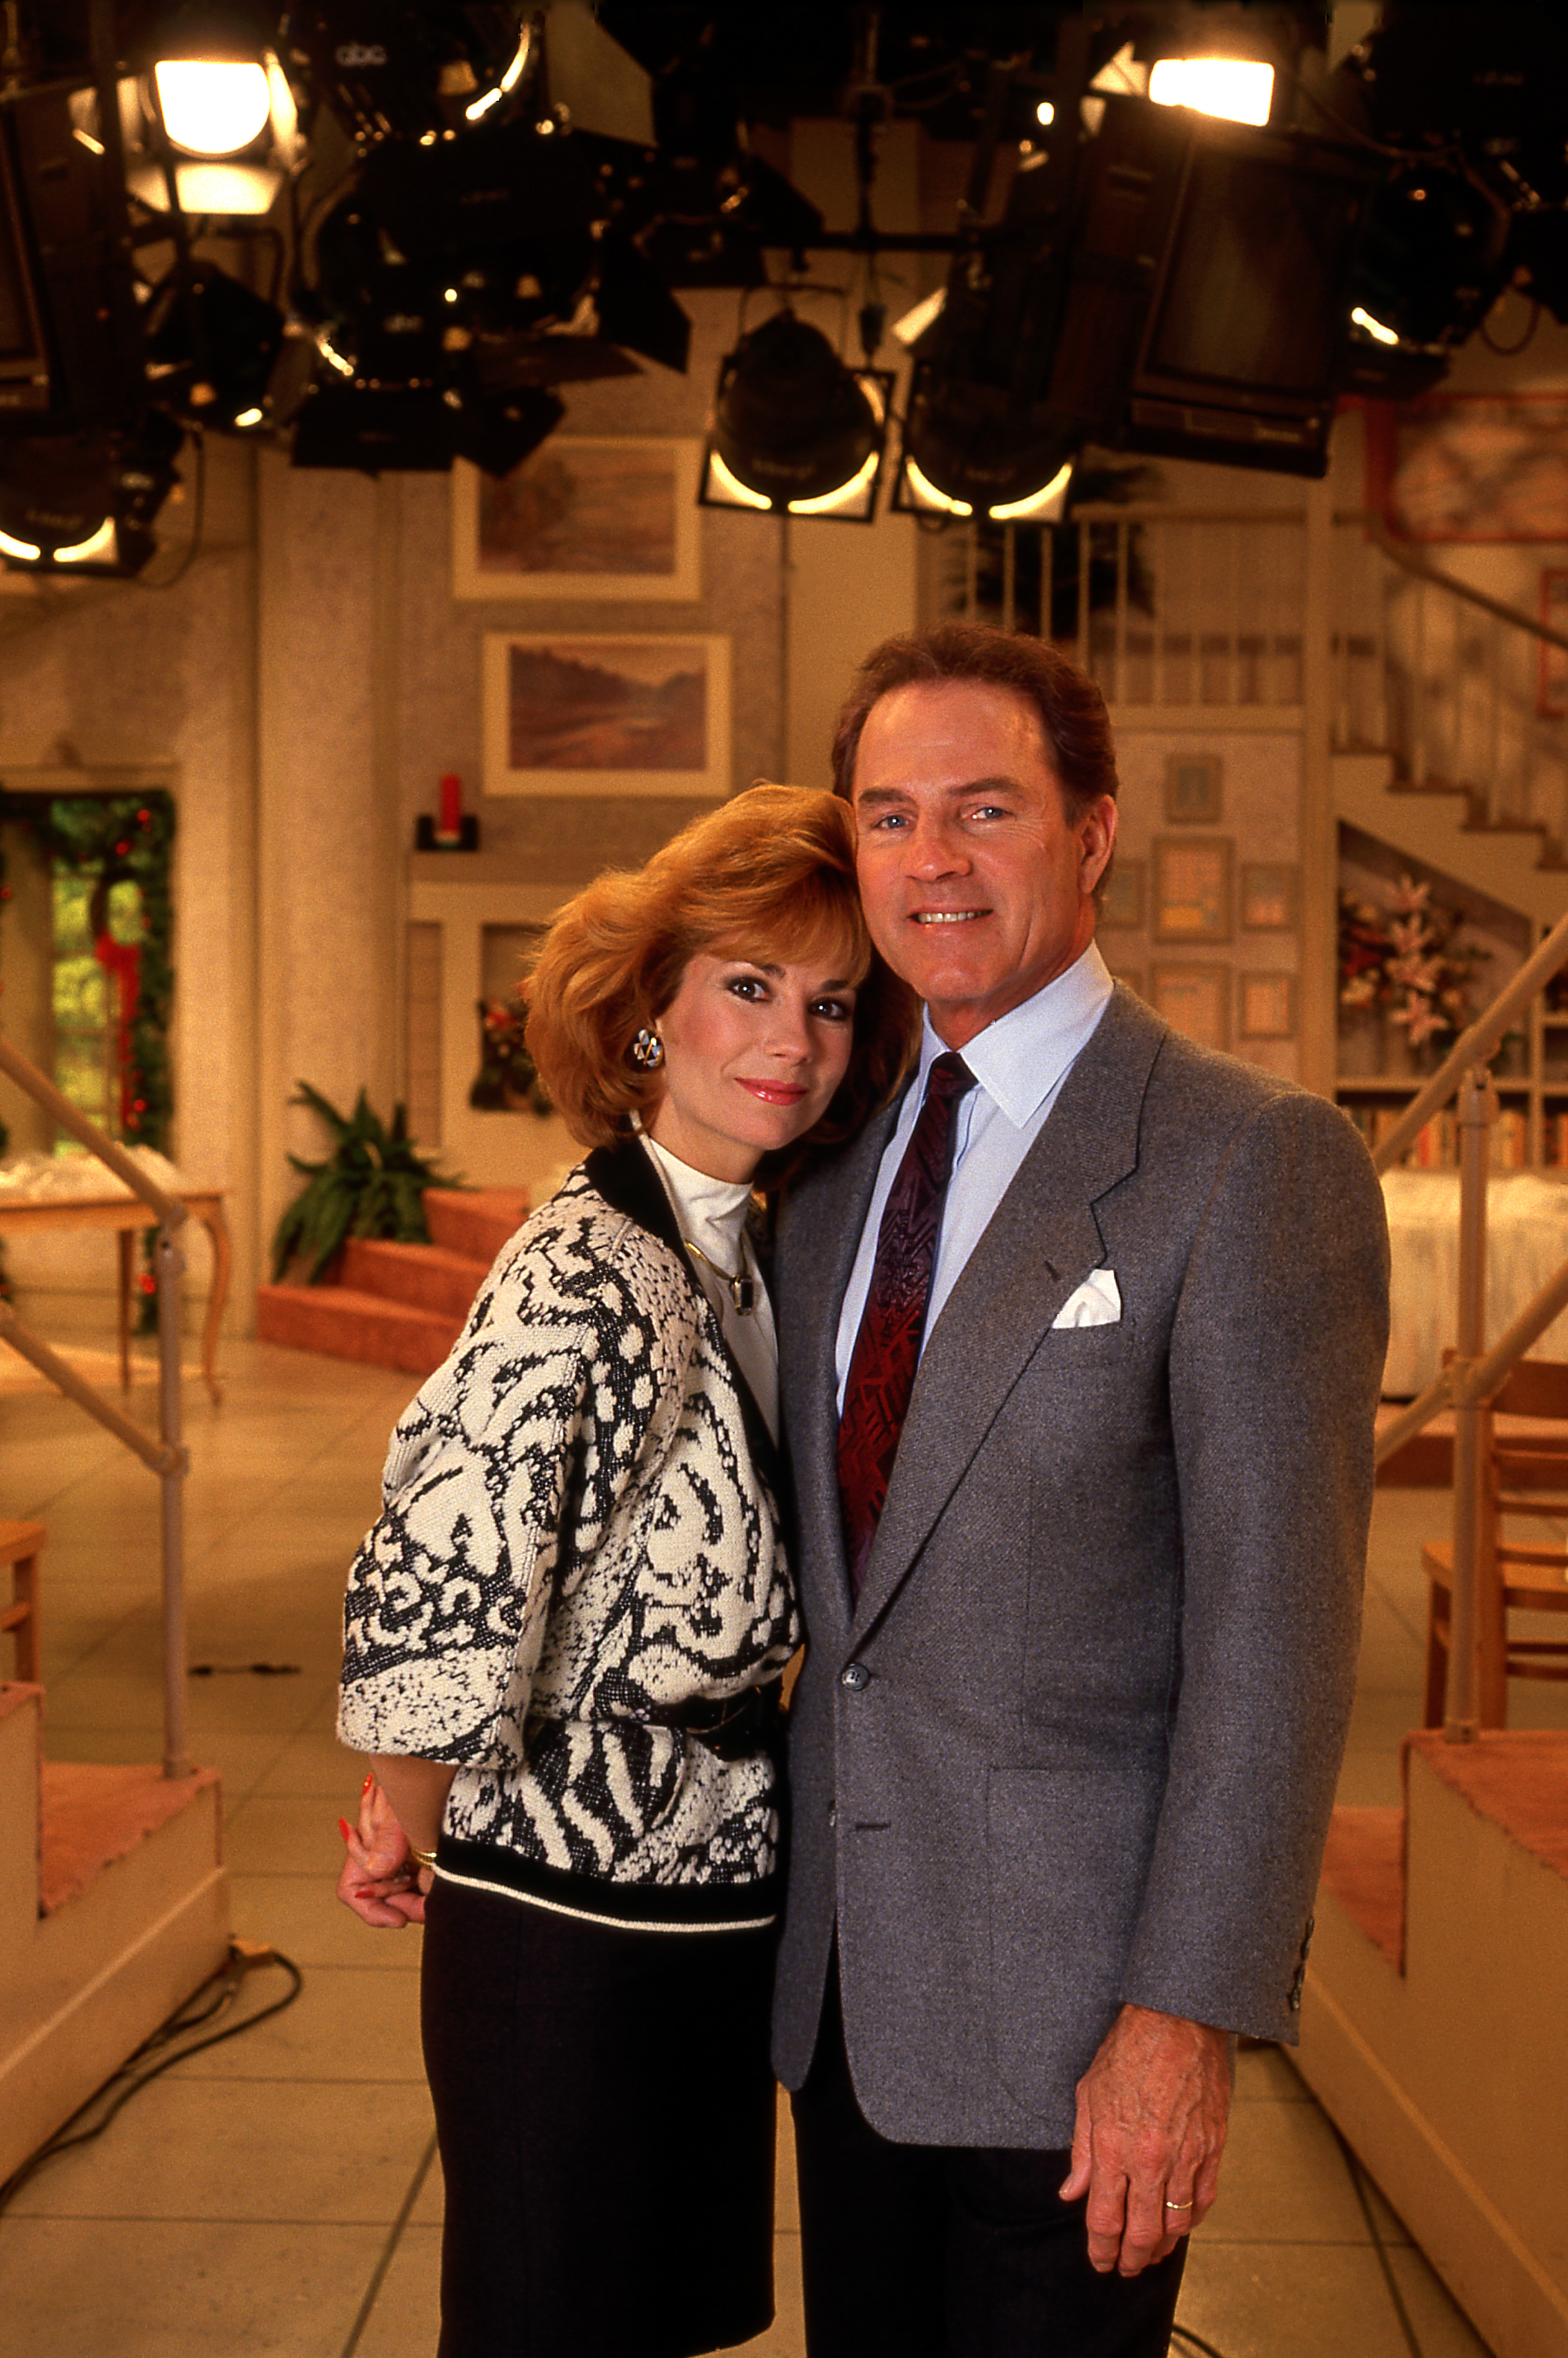 Frank and Kathie Lee Gifford on the set of "Good Morning America" circa 1988 | Source: Getty Images